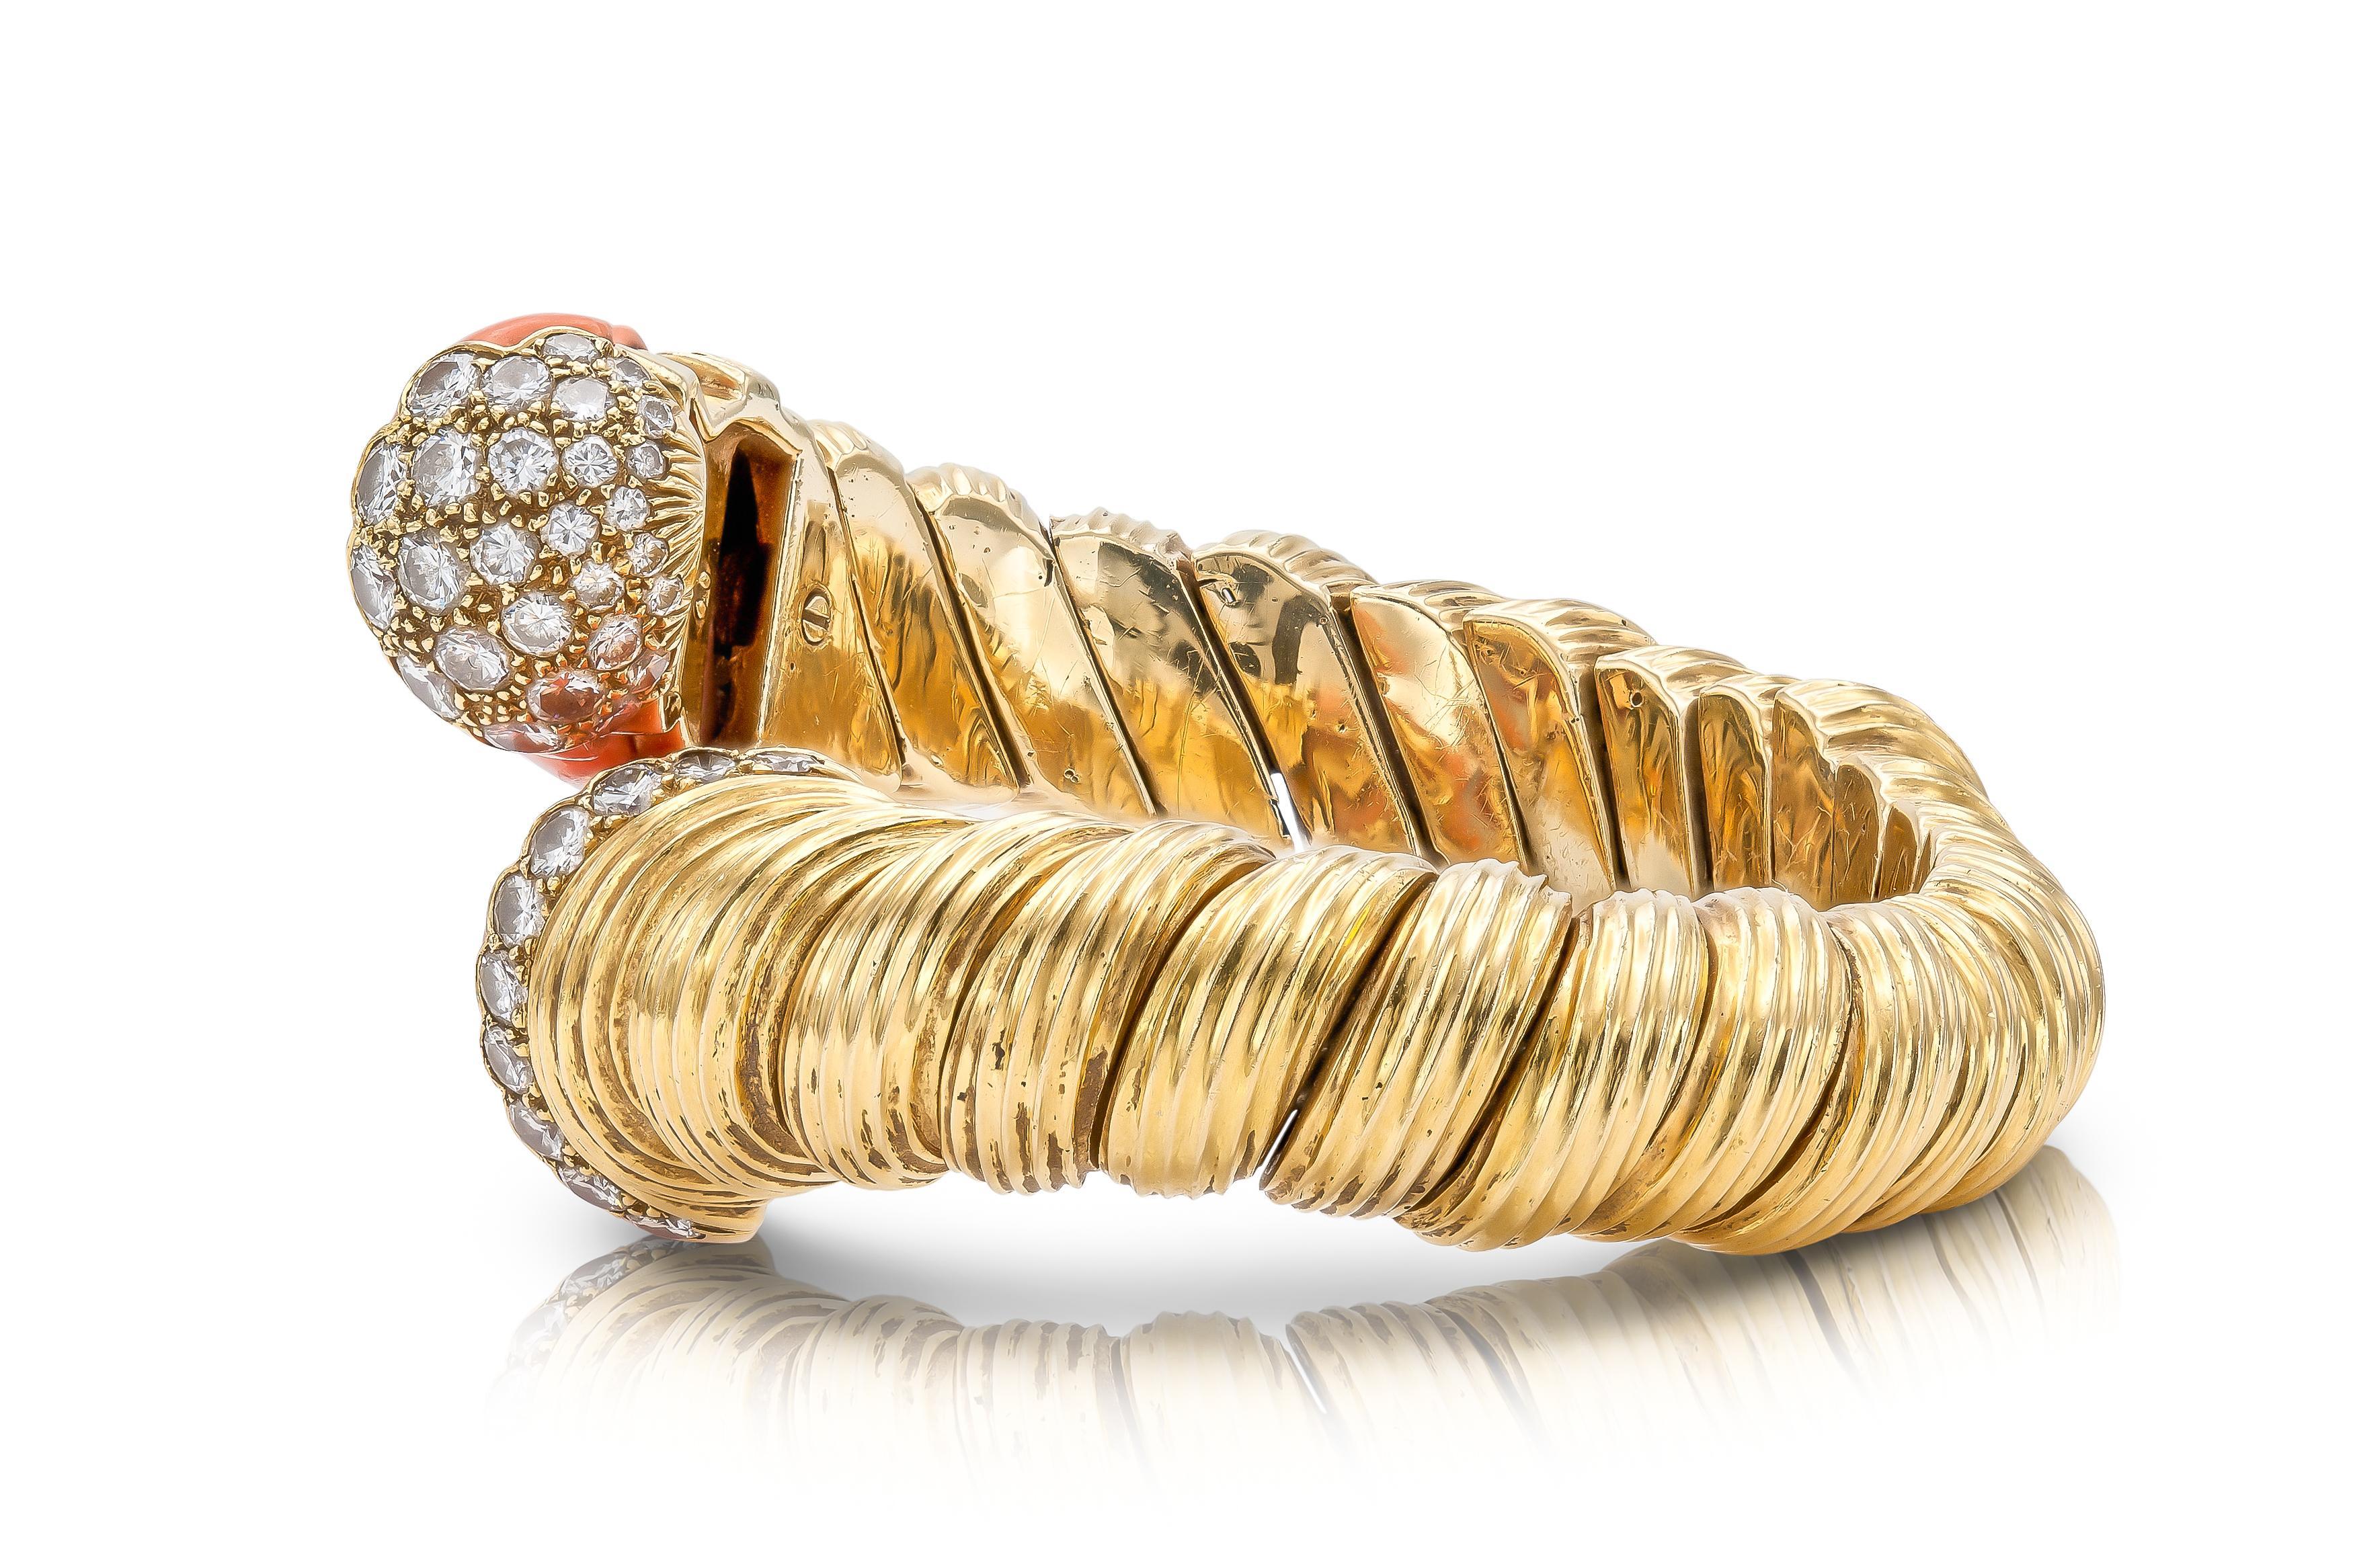 Finely crafted in 18k yellow gold with carved Coral and Round Brilliant cut Diamonds weighing approximately a total of 4.00 carats.
Signed by David Webb
Circa 1960s
Size 6 inches